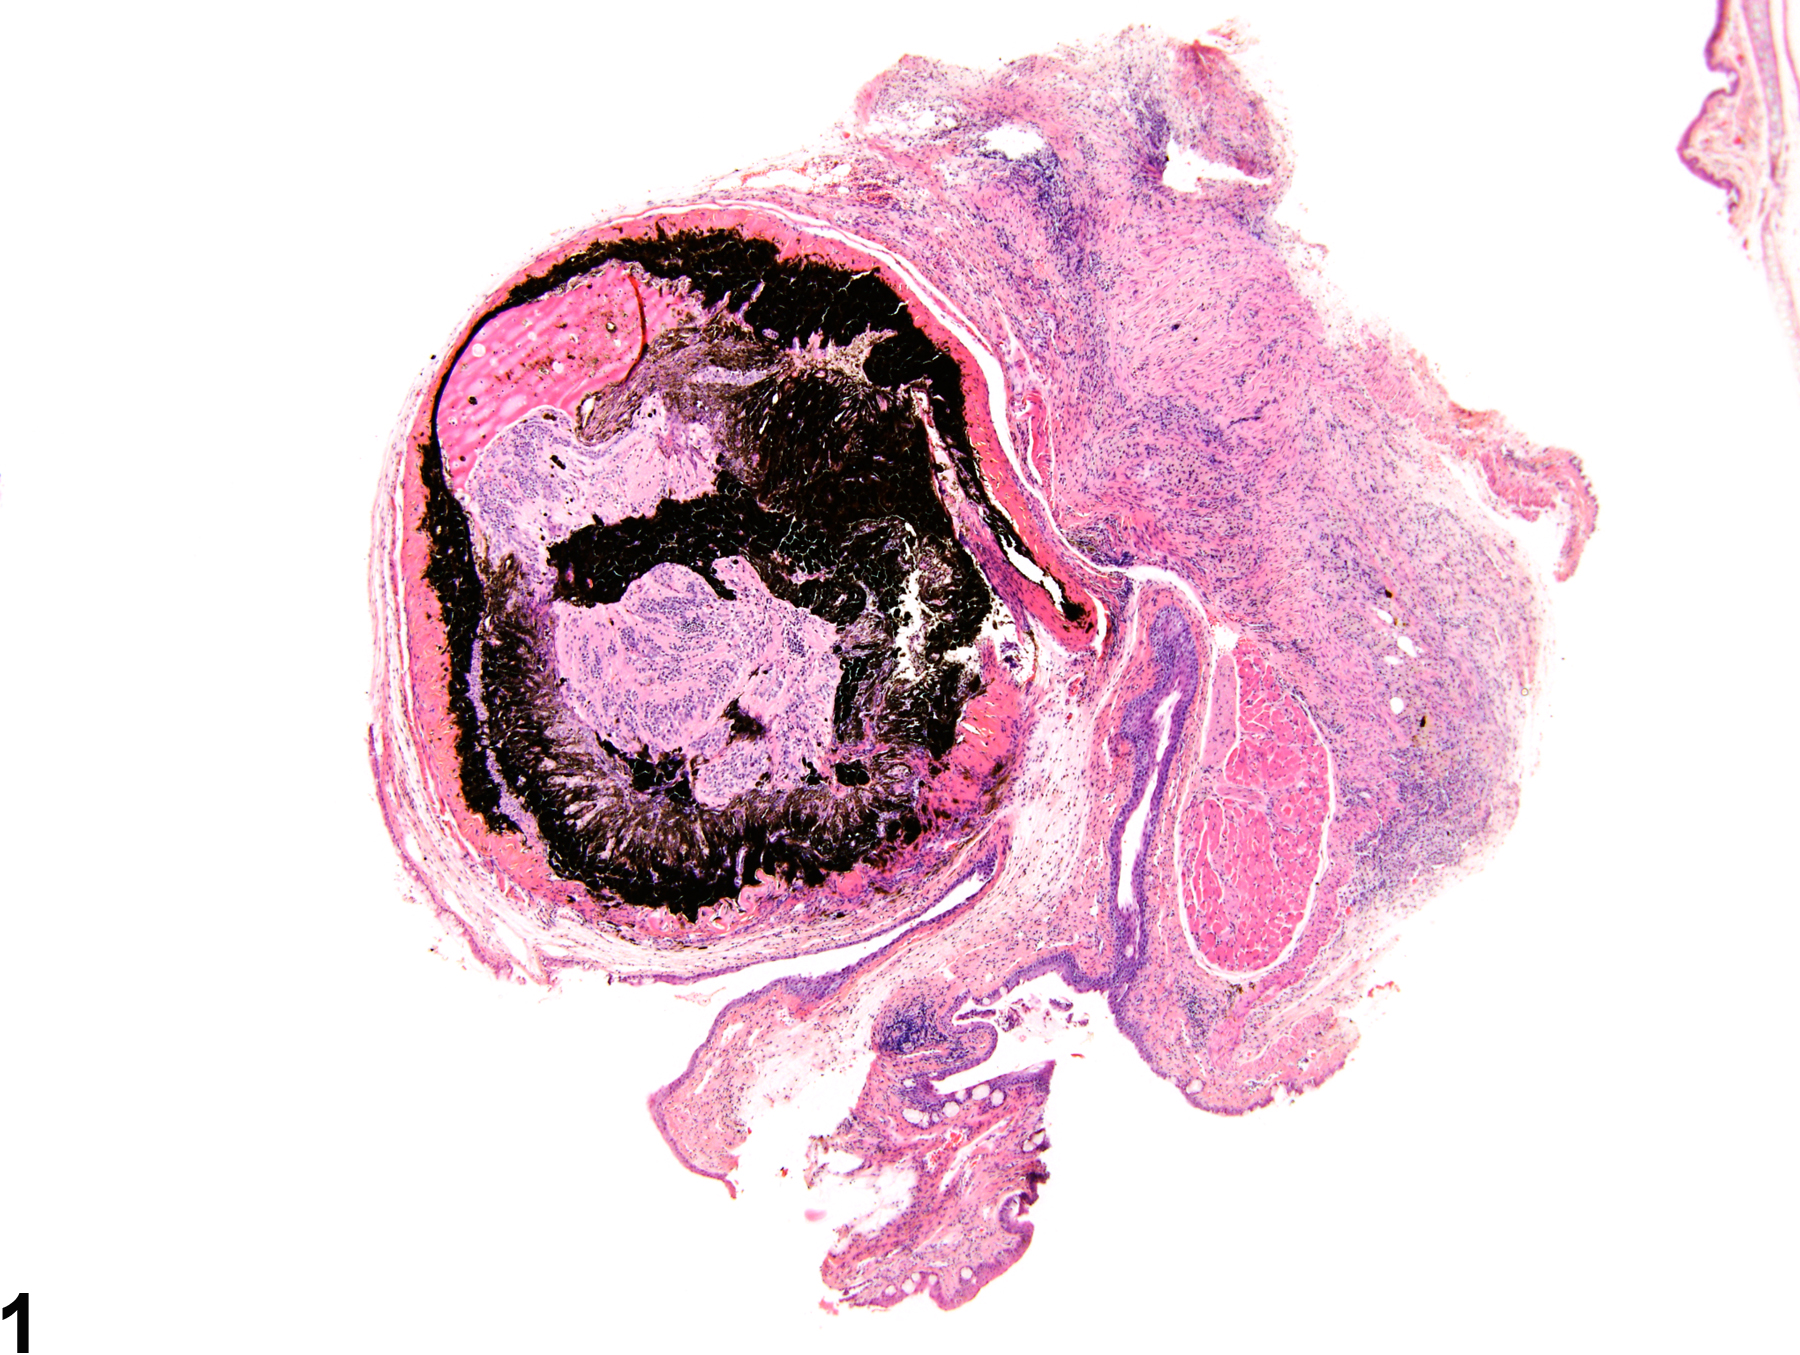 Image of phthisis bulbi in the eye from a female B6C3F1 mouse in a chronic study